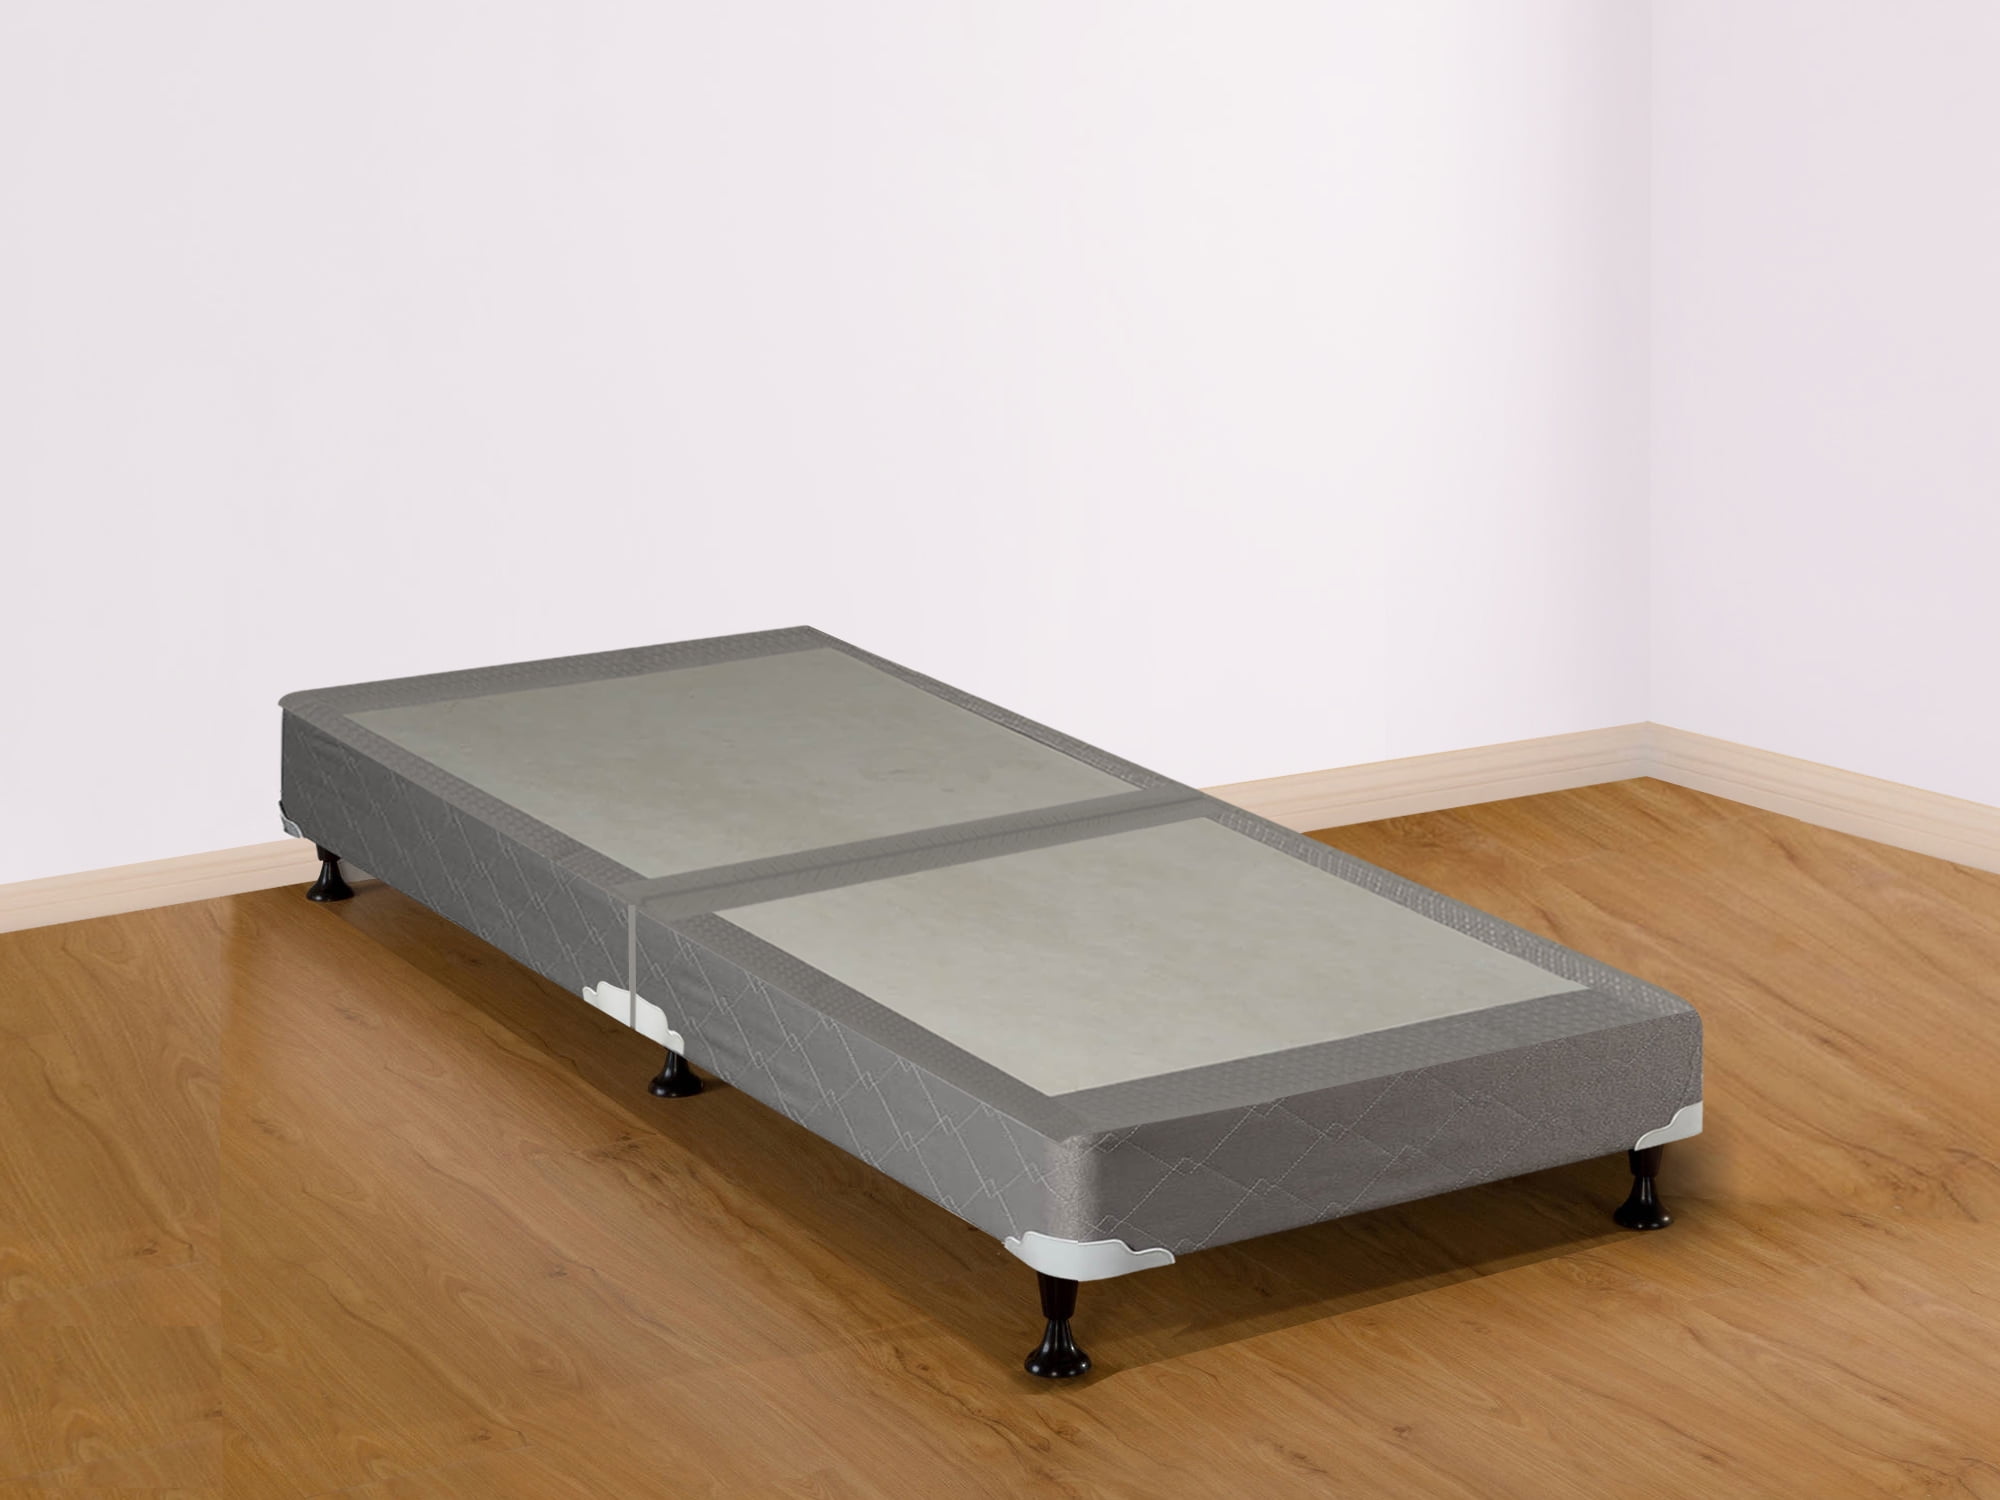 twin box spring or support for mattress